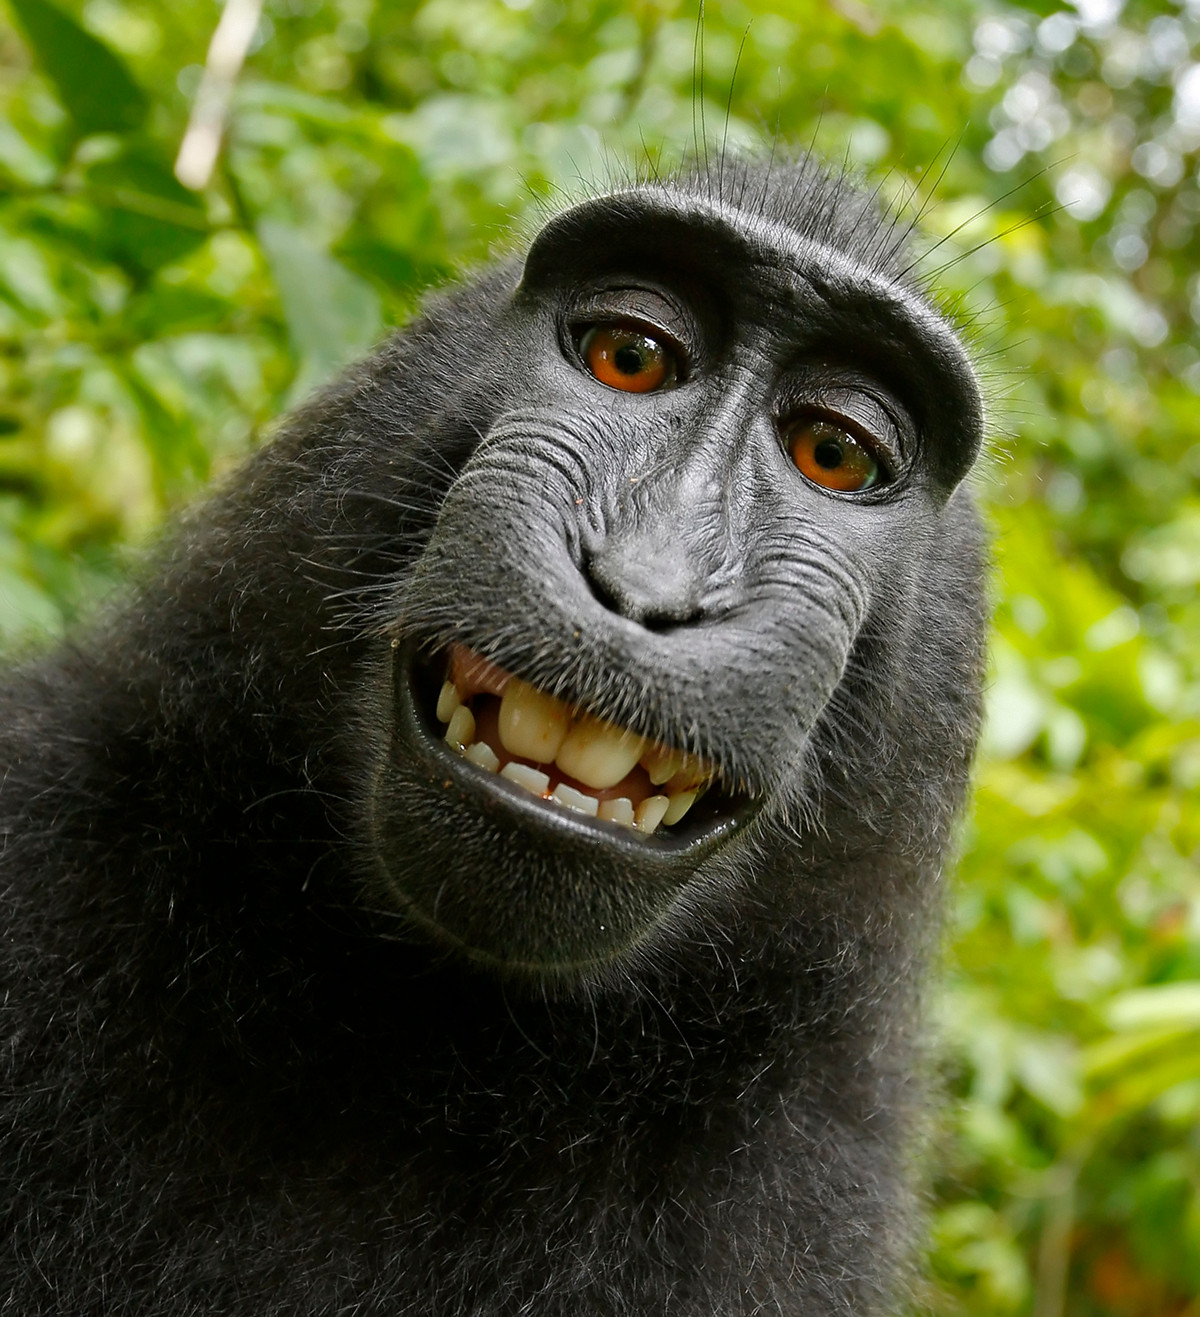 Self-portrait of a female Celebes crested macaque (Macaca nigra) in North Sulawesi, Indonesia, who had picked up photographer David Slater's camera and photographed herself with it. Via Wikipedia. PD